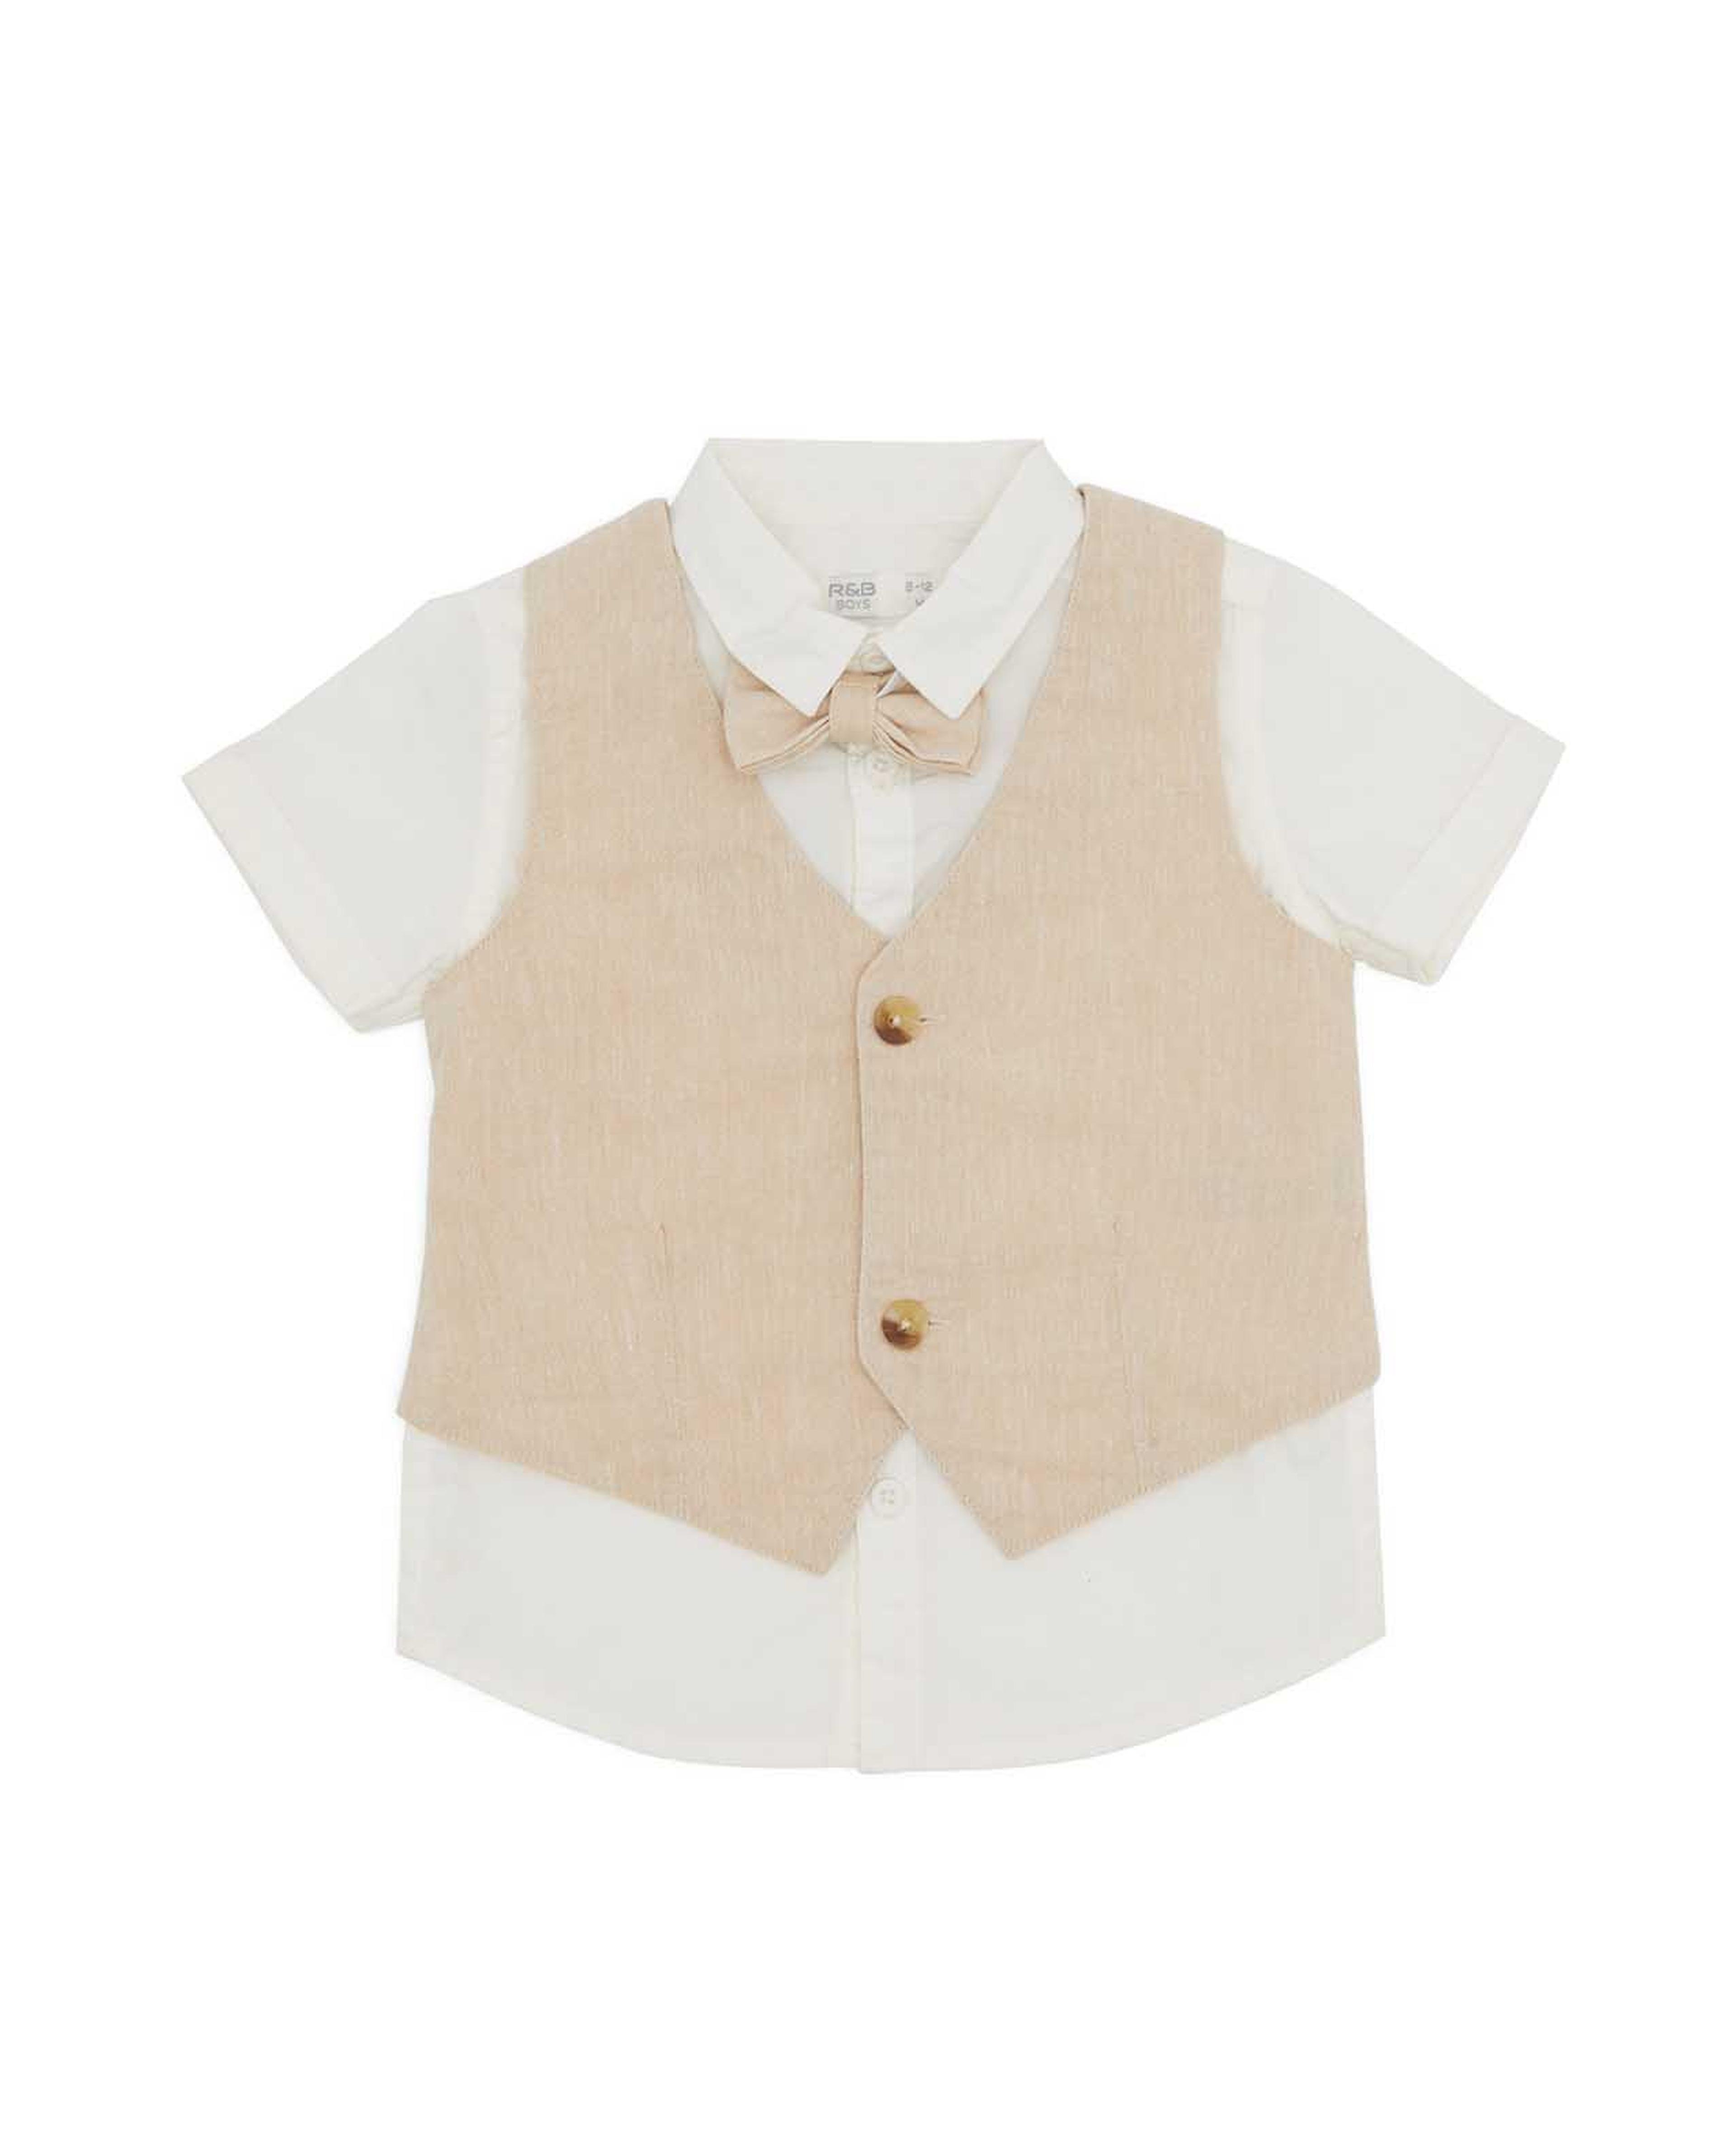 3 Piece Solid Clothing Set with Bow-Tie